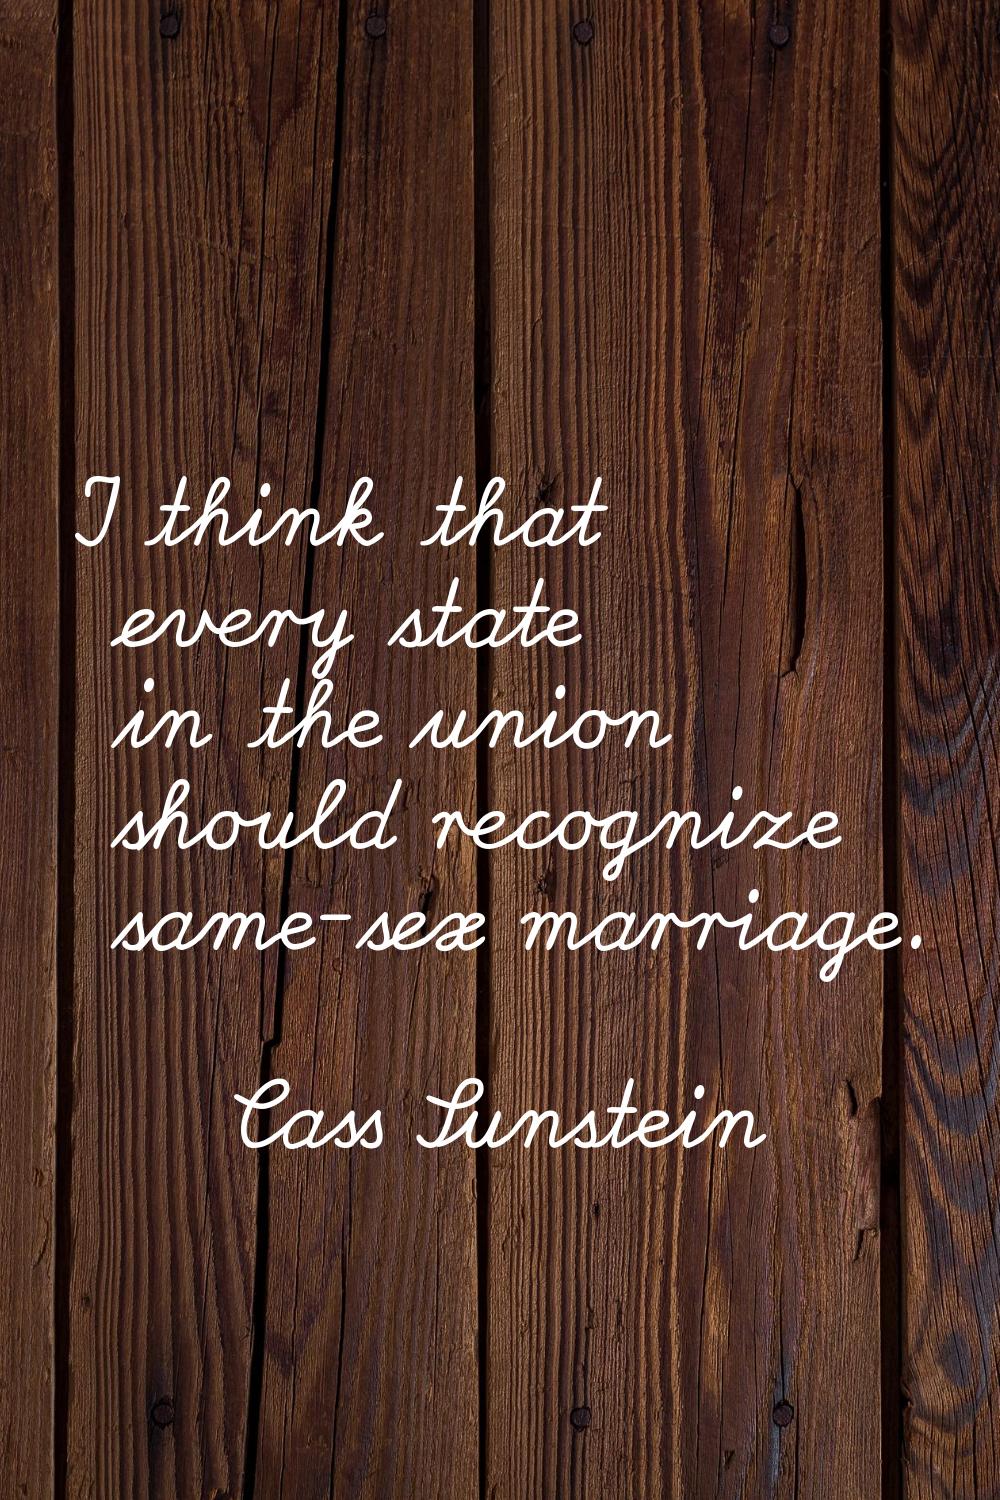 I think that every state in the union should recognize same-sex marriage.